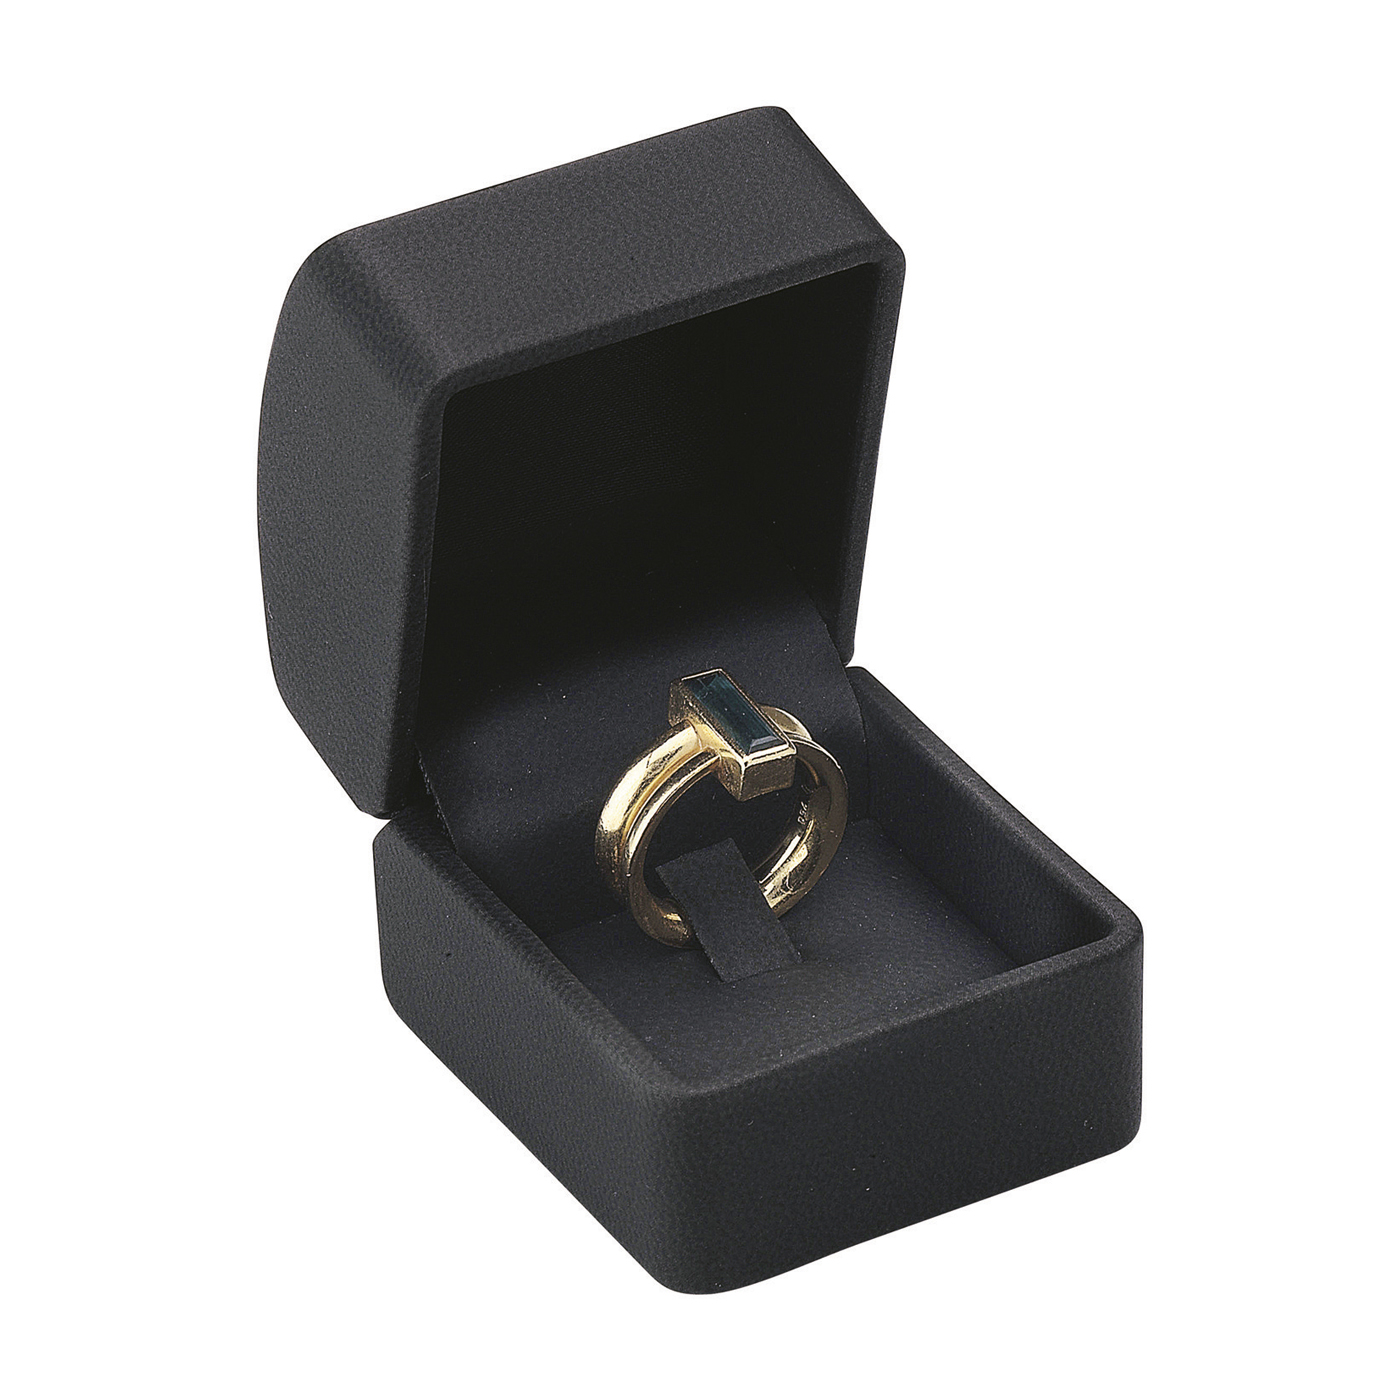 Jewellery Packaging "Soft Touch", Black, 45 x 45 x 40 mm - 1 piece